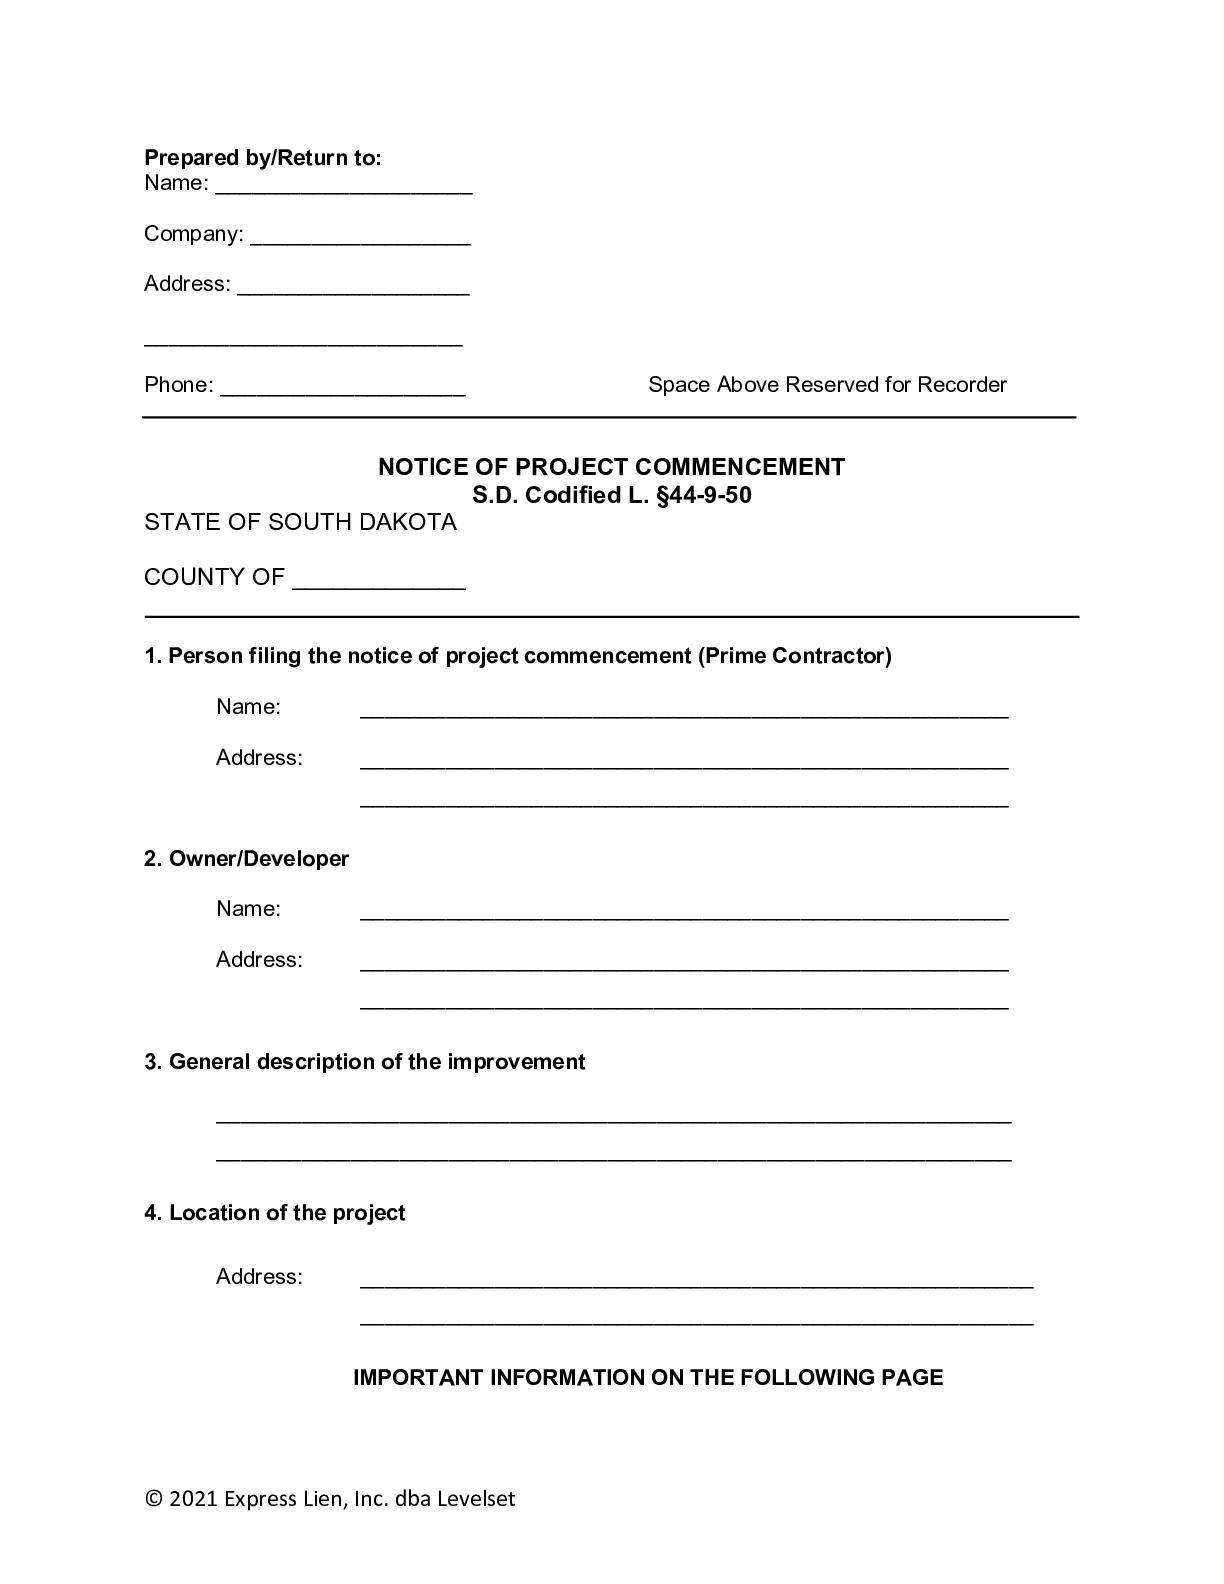 South Dakota Notice of Project Commencement Form